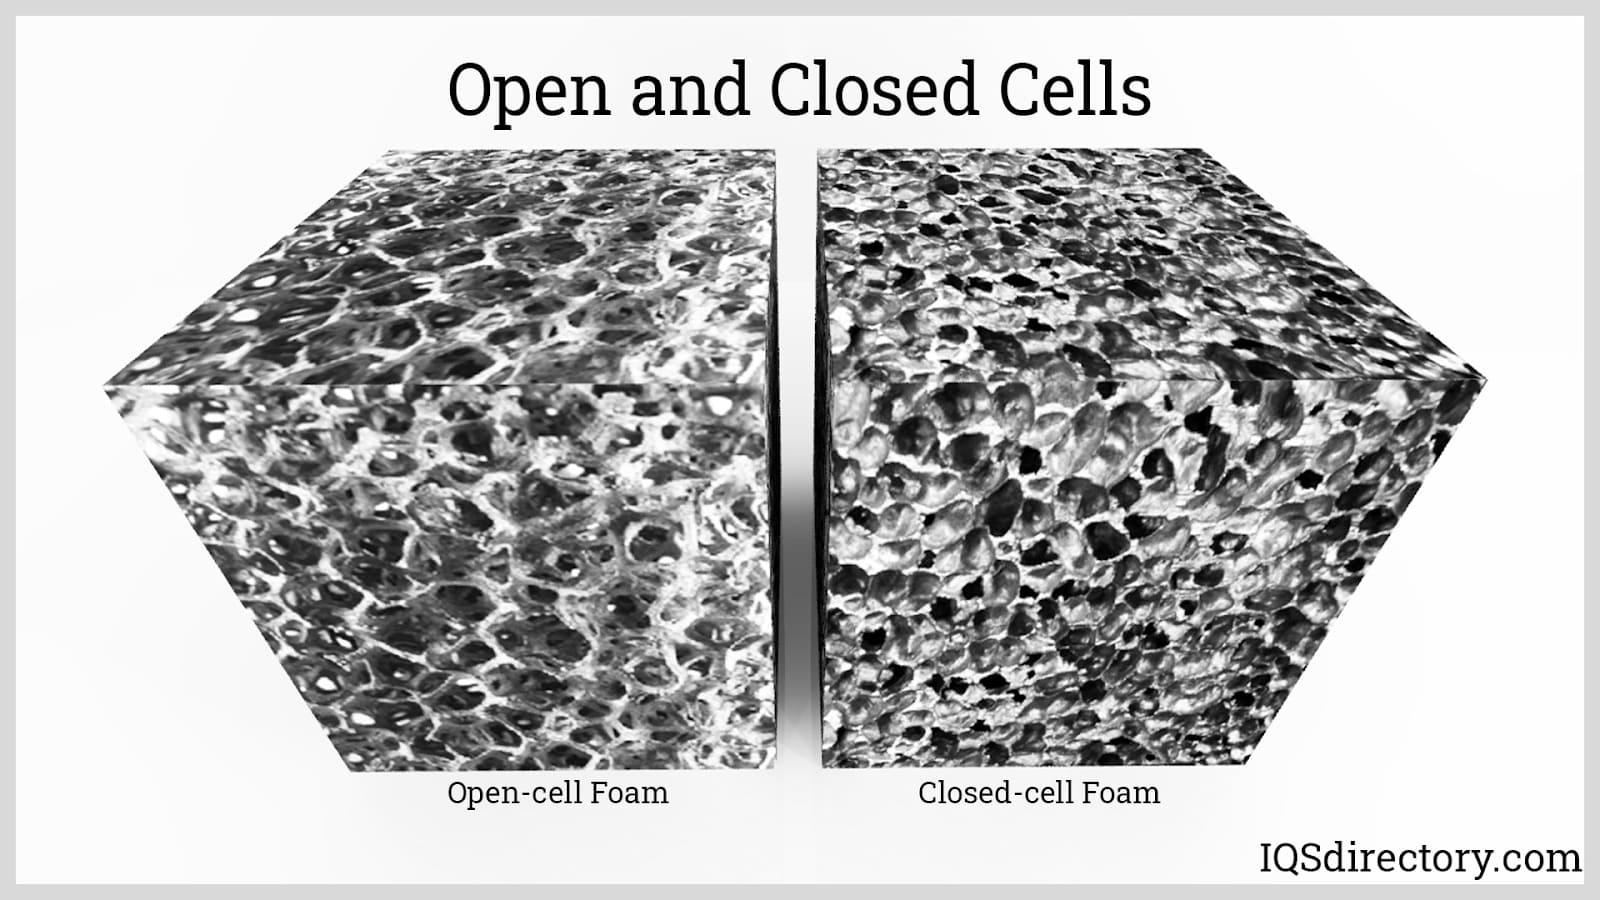 Open and Closed Cells